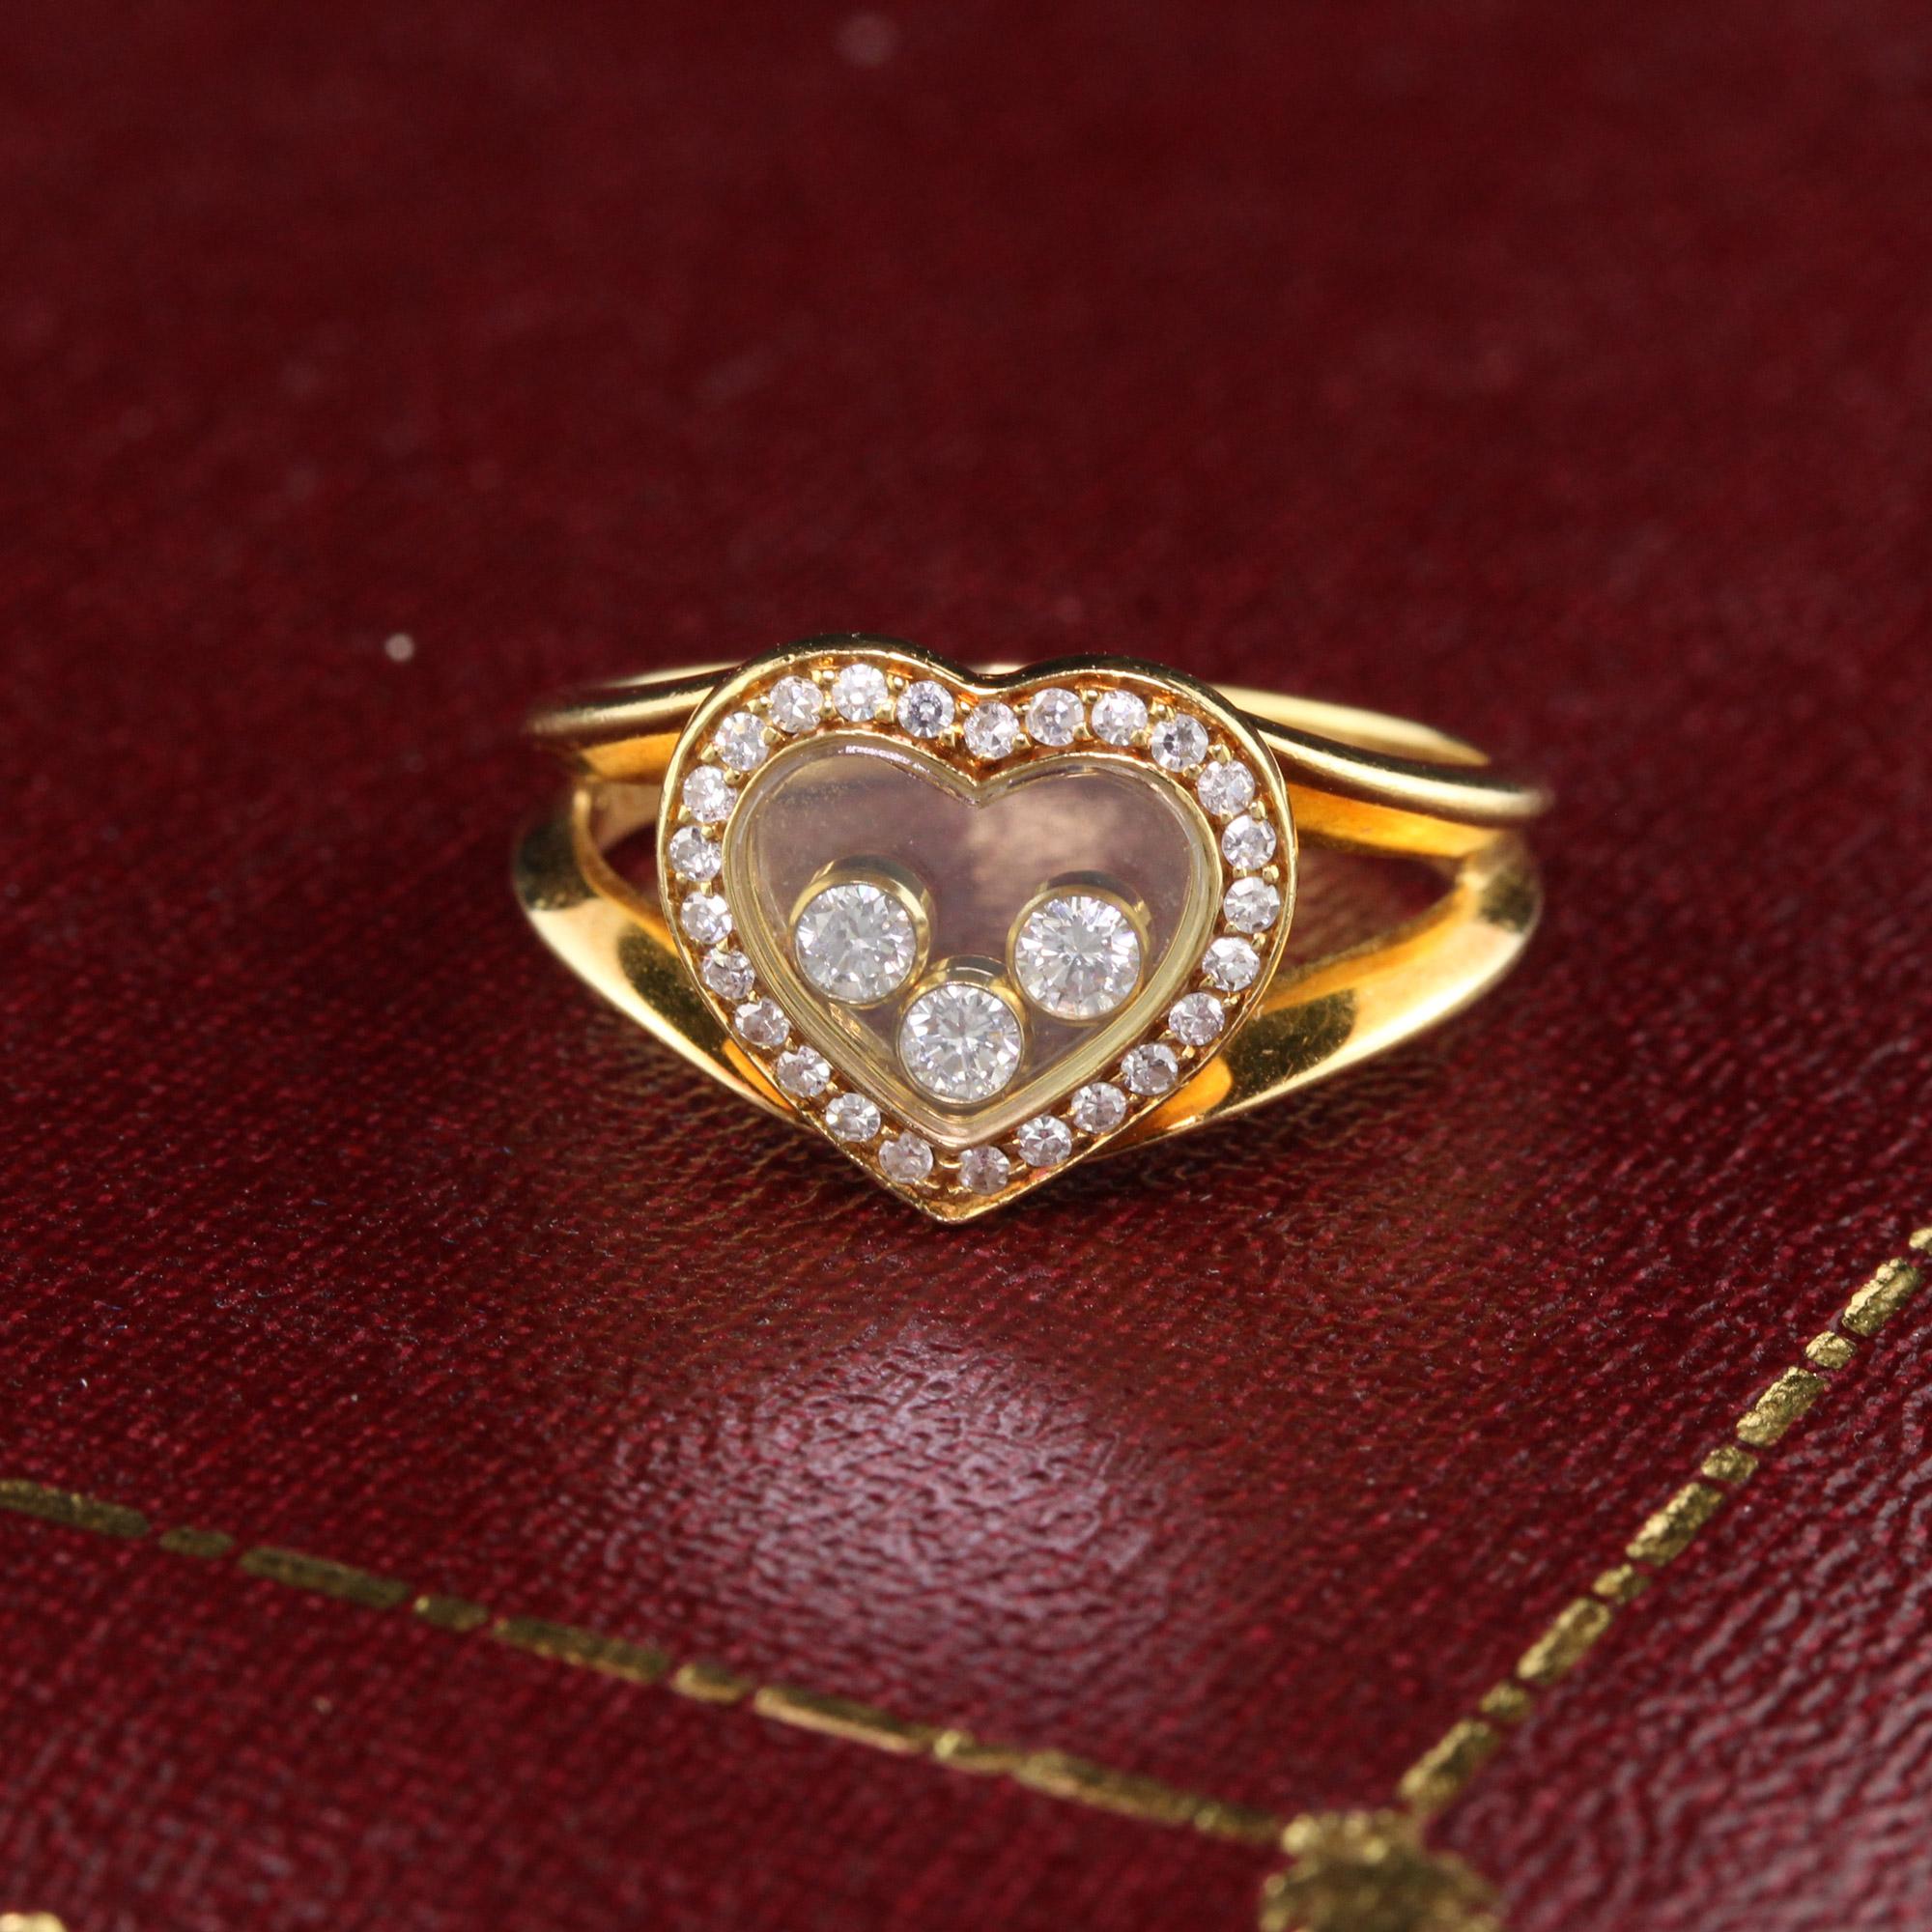 Gorgeous Chopard heart ring with diamonds in and on the heart  

#R0404

Metal: 18K Yellow Gold

Weight: 5.1 Grams

Ring Size: 6.75

*Unfortunately this ring cannot be sized.

Measurements: 10.8 mm

Measurement from finger to top of ring: 3.6 mm